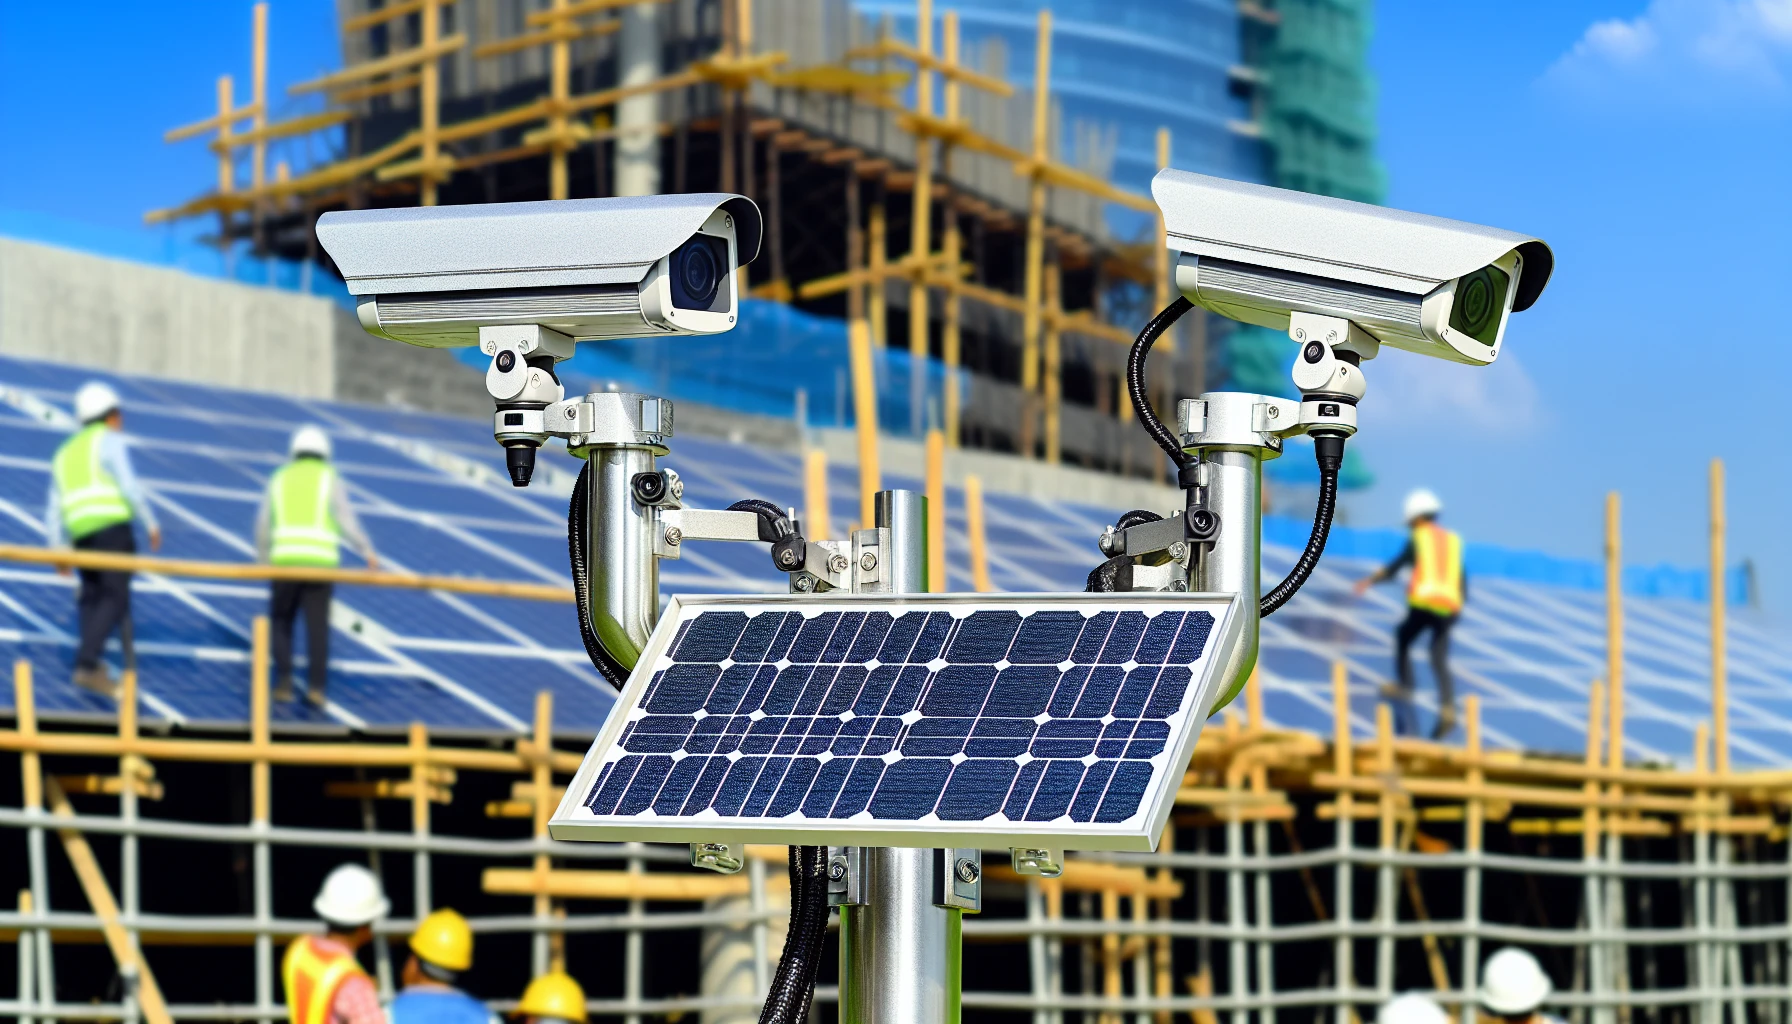 High-quality surveillance cameras powered by solar panels at a construction site